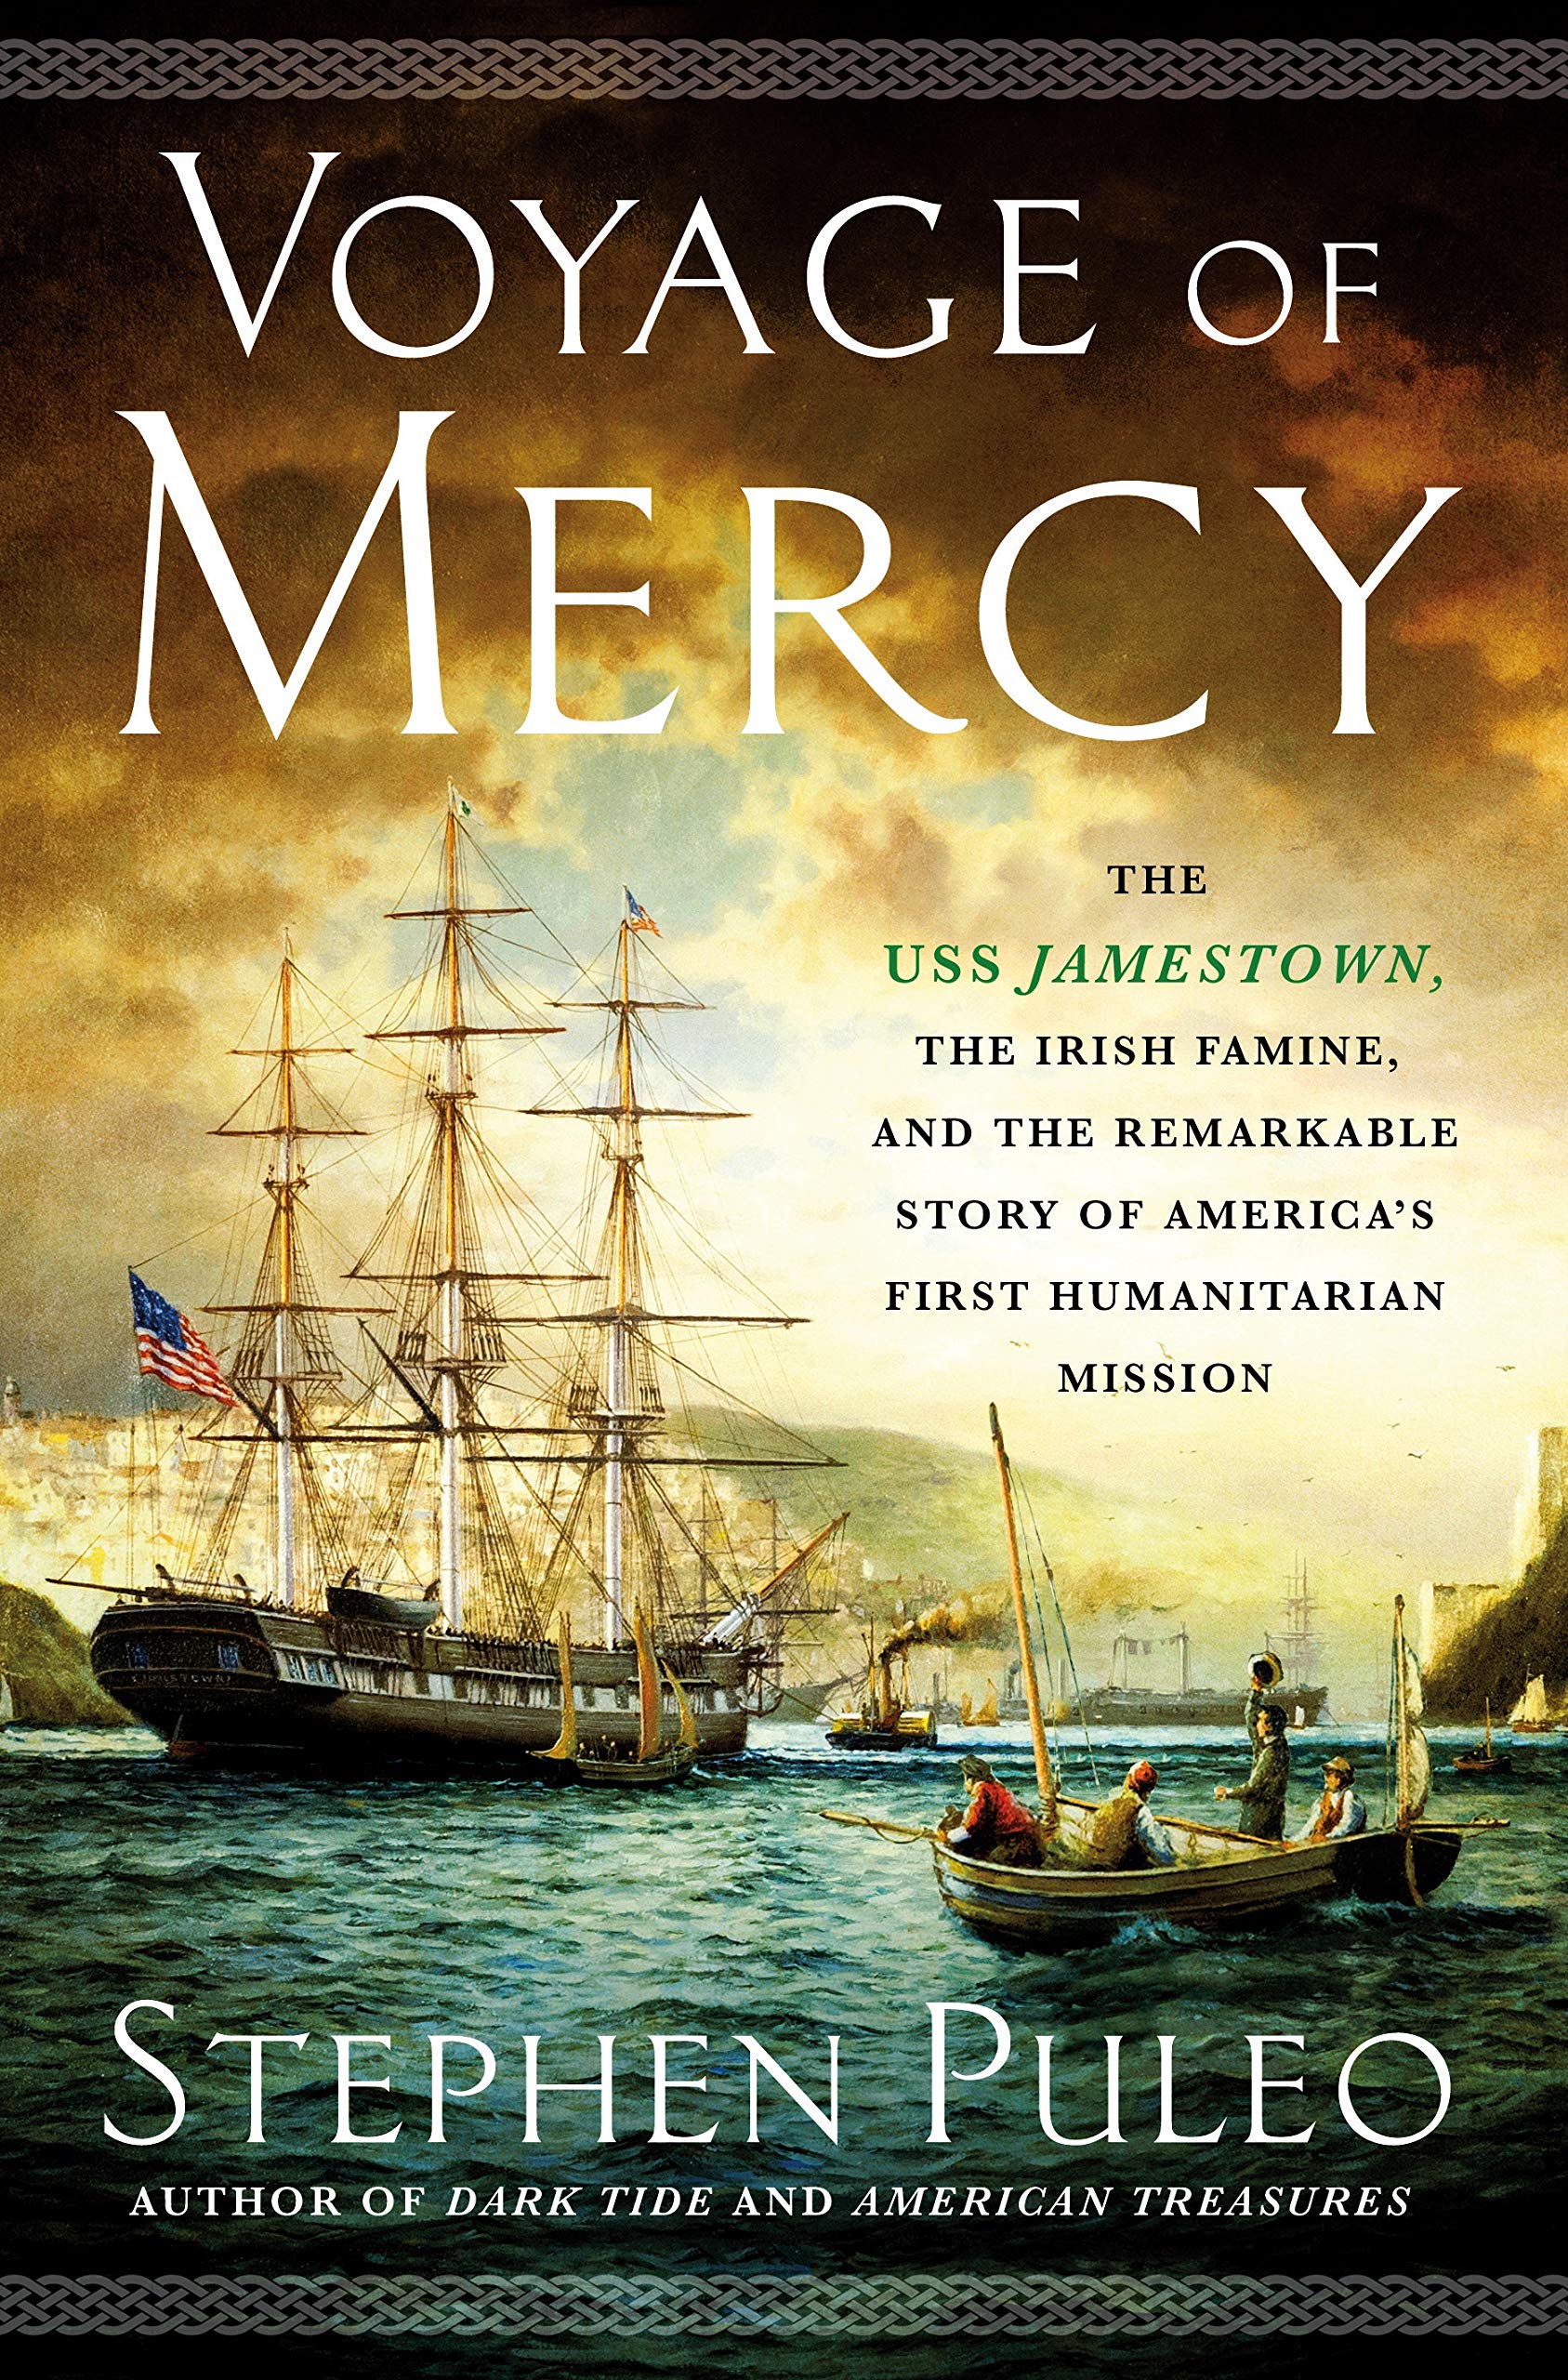 Image for "Voyage of Mercy"